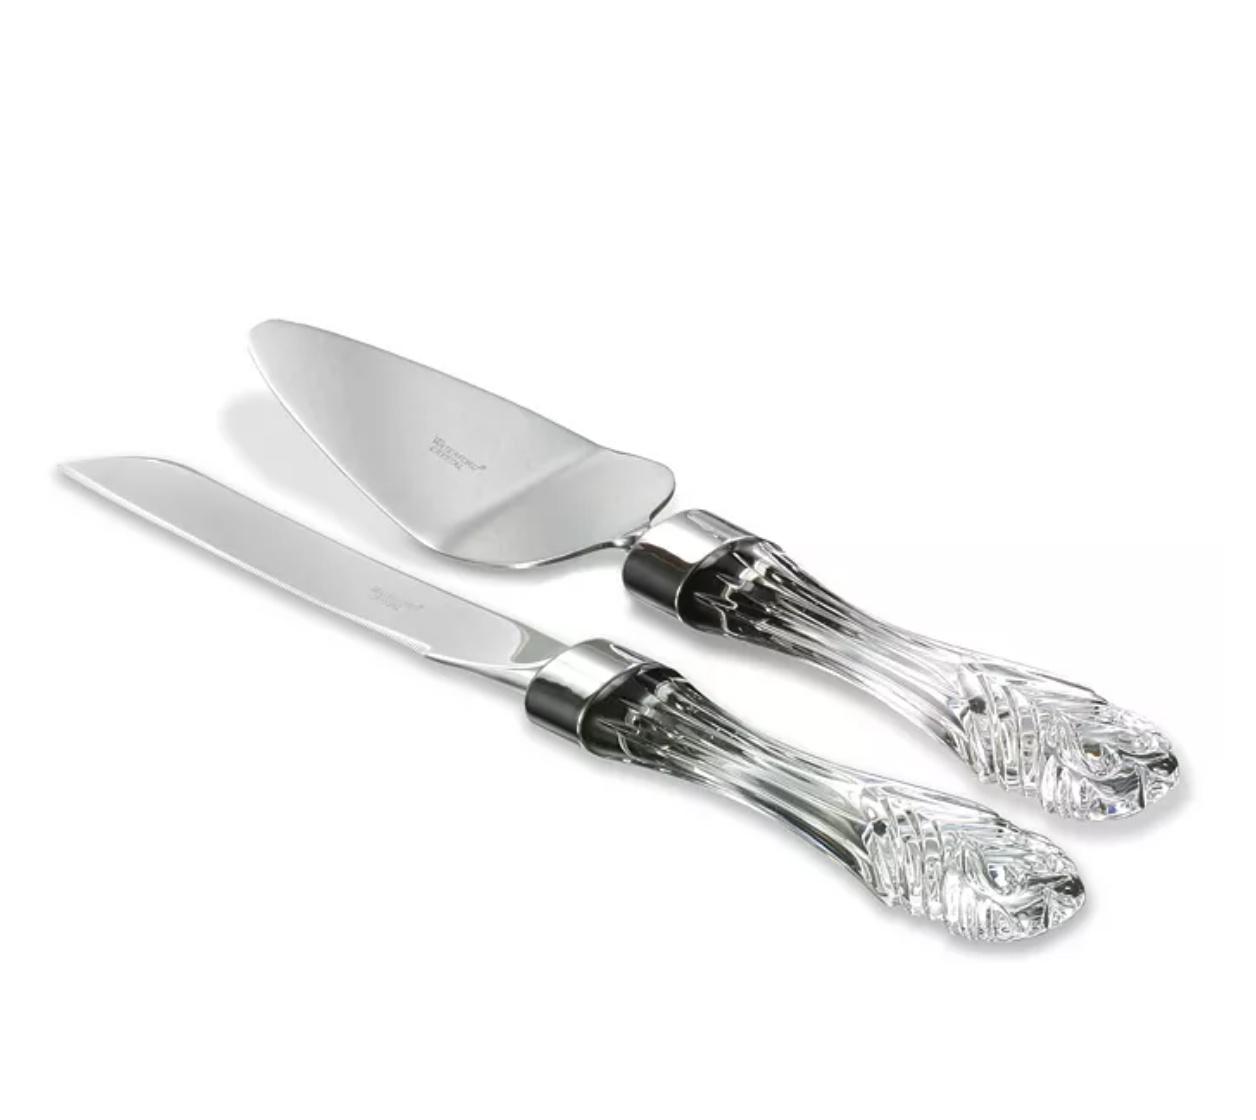 Amazon.com | Cake Knife and Server Set Unique Design Design Cake Cutter  Serving Set Perfect For Wedding Birthday Parties, Event: Cake, Pie & Pastry  Servers